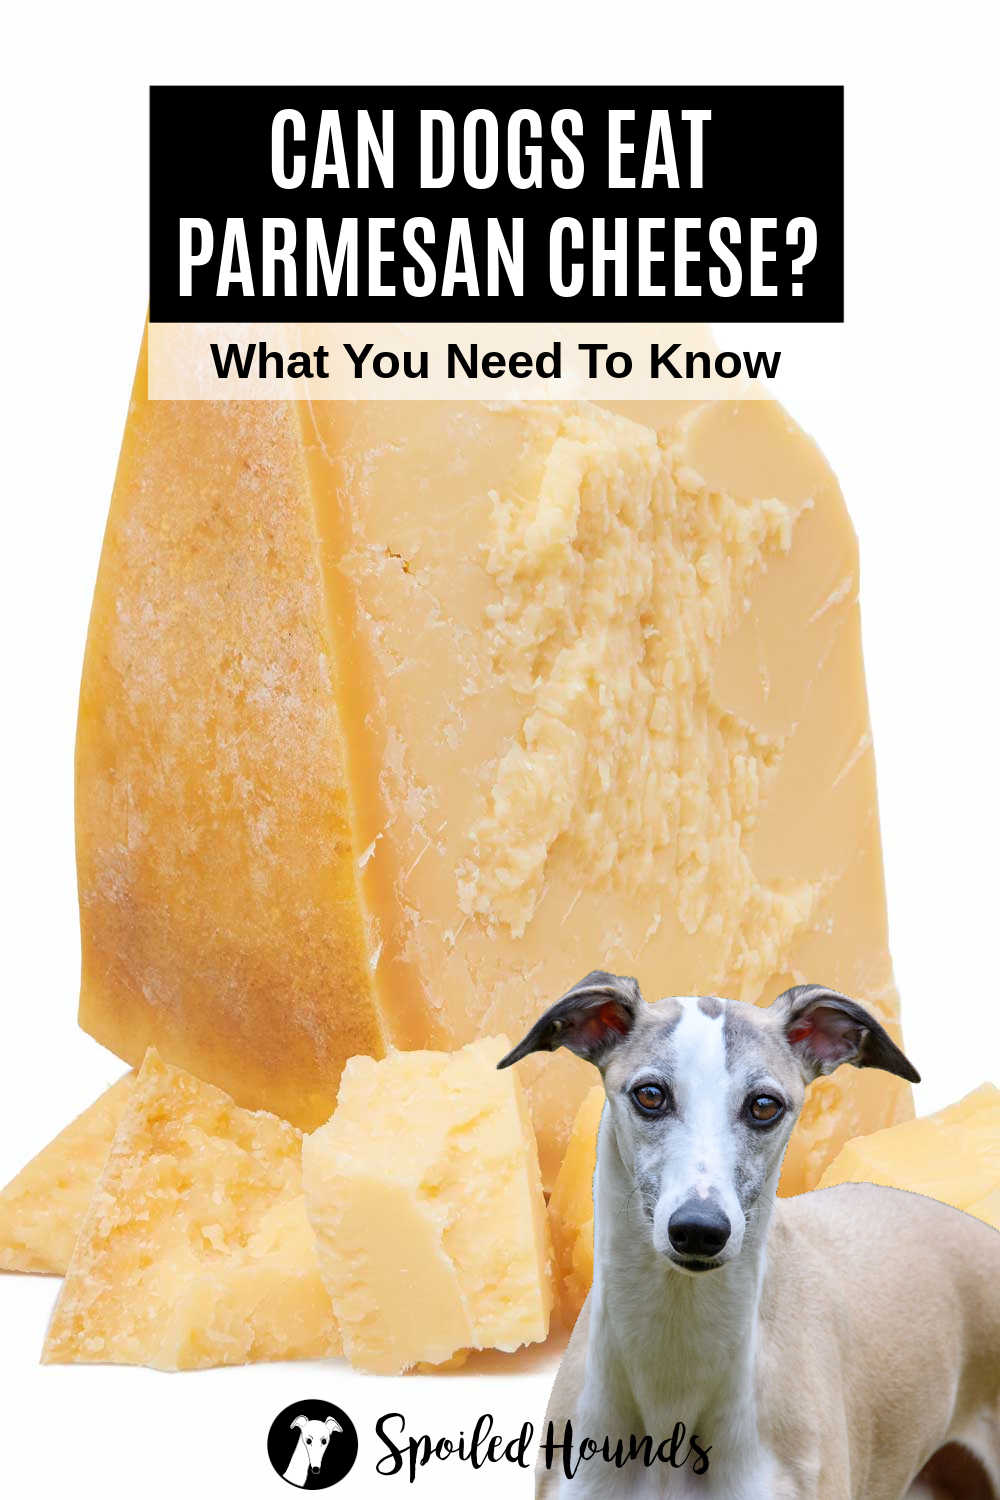 Whippet dog in front of parmesan cheese.